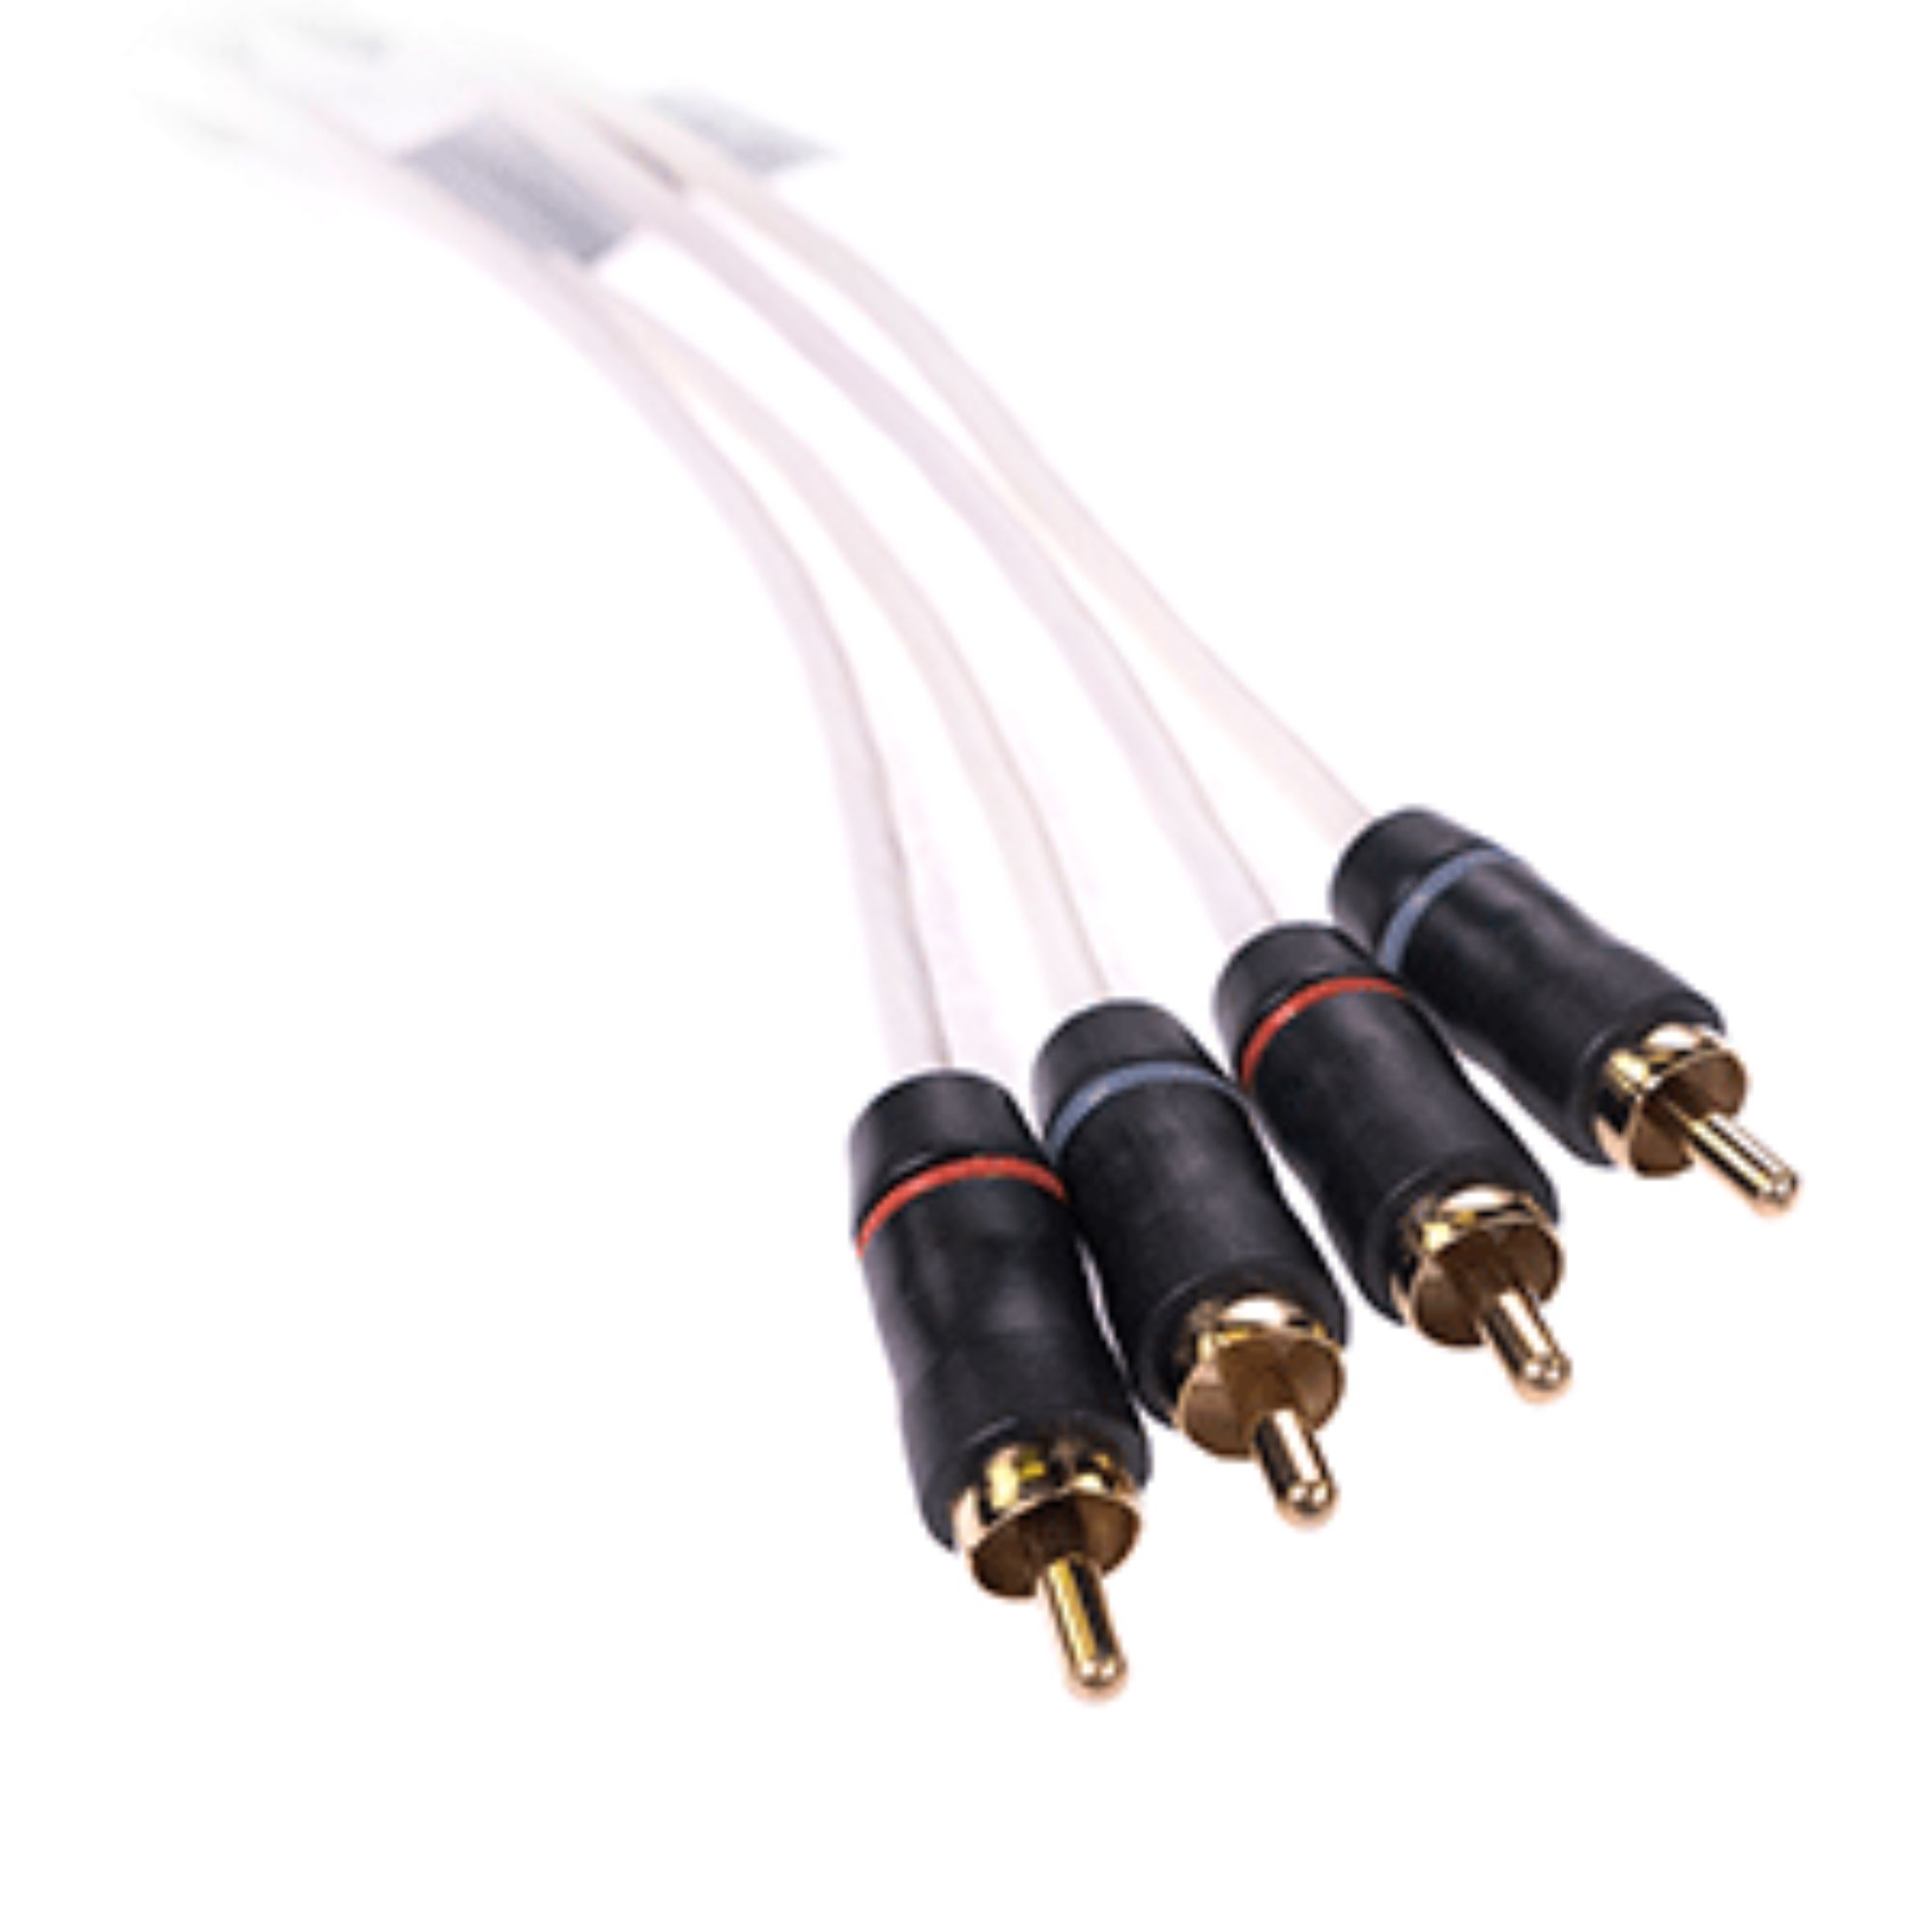 Fusion MS-FRCA12 12 ft 4-Way Shielded RCA Cable 010-12619-00 Shielded RCA Cable - image 1 of 2